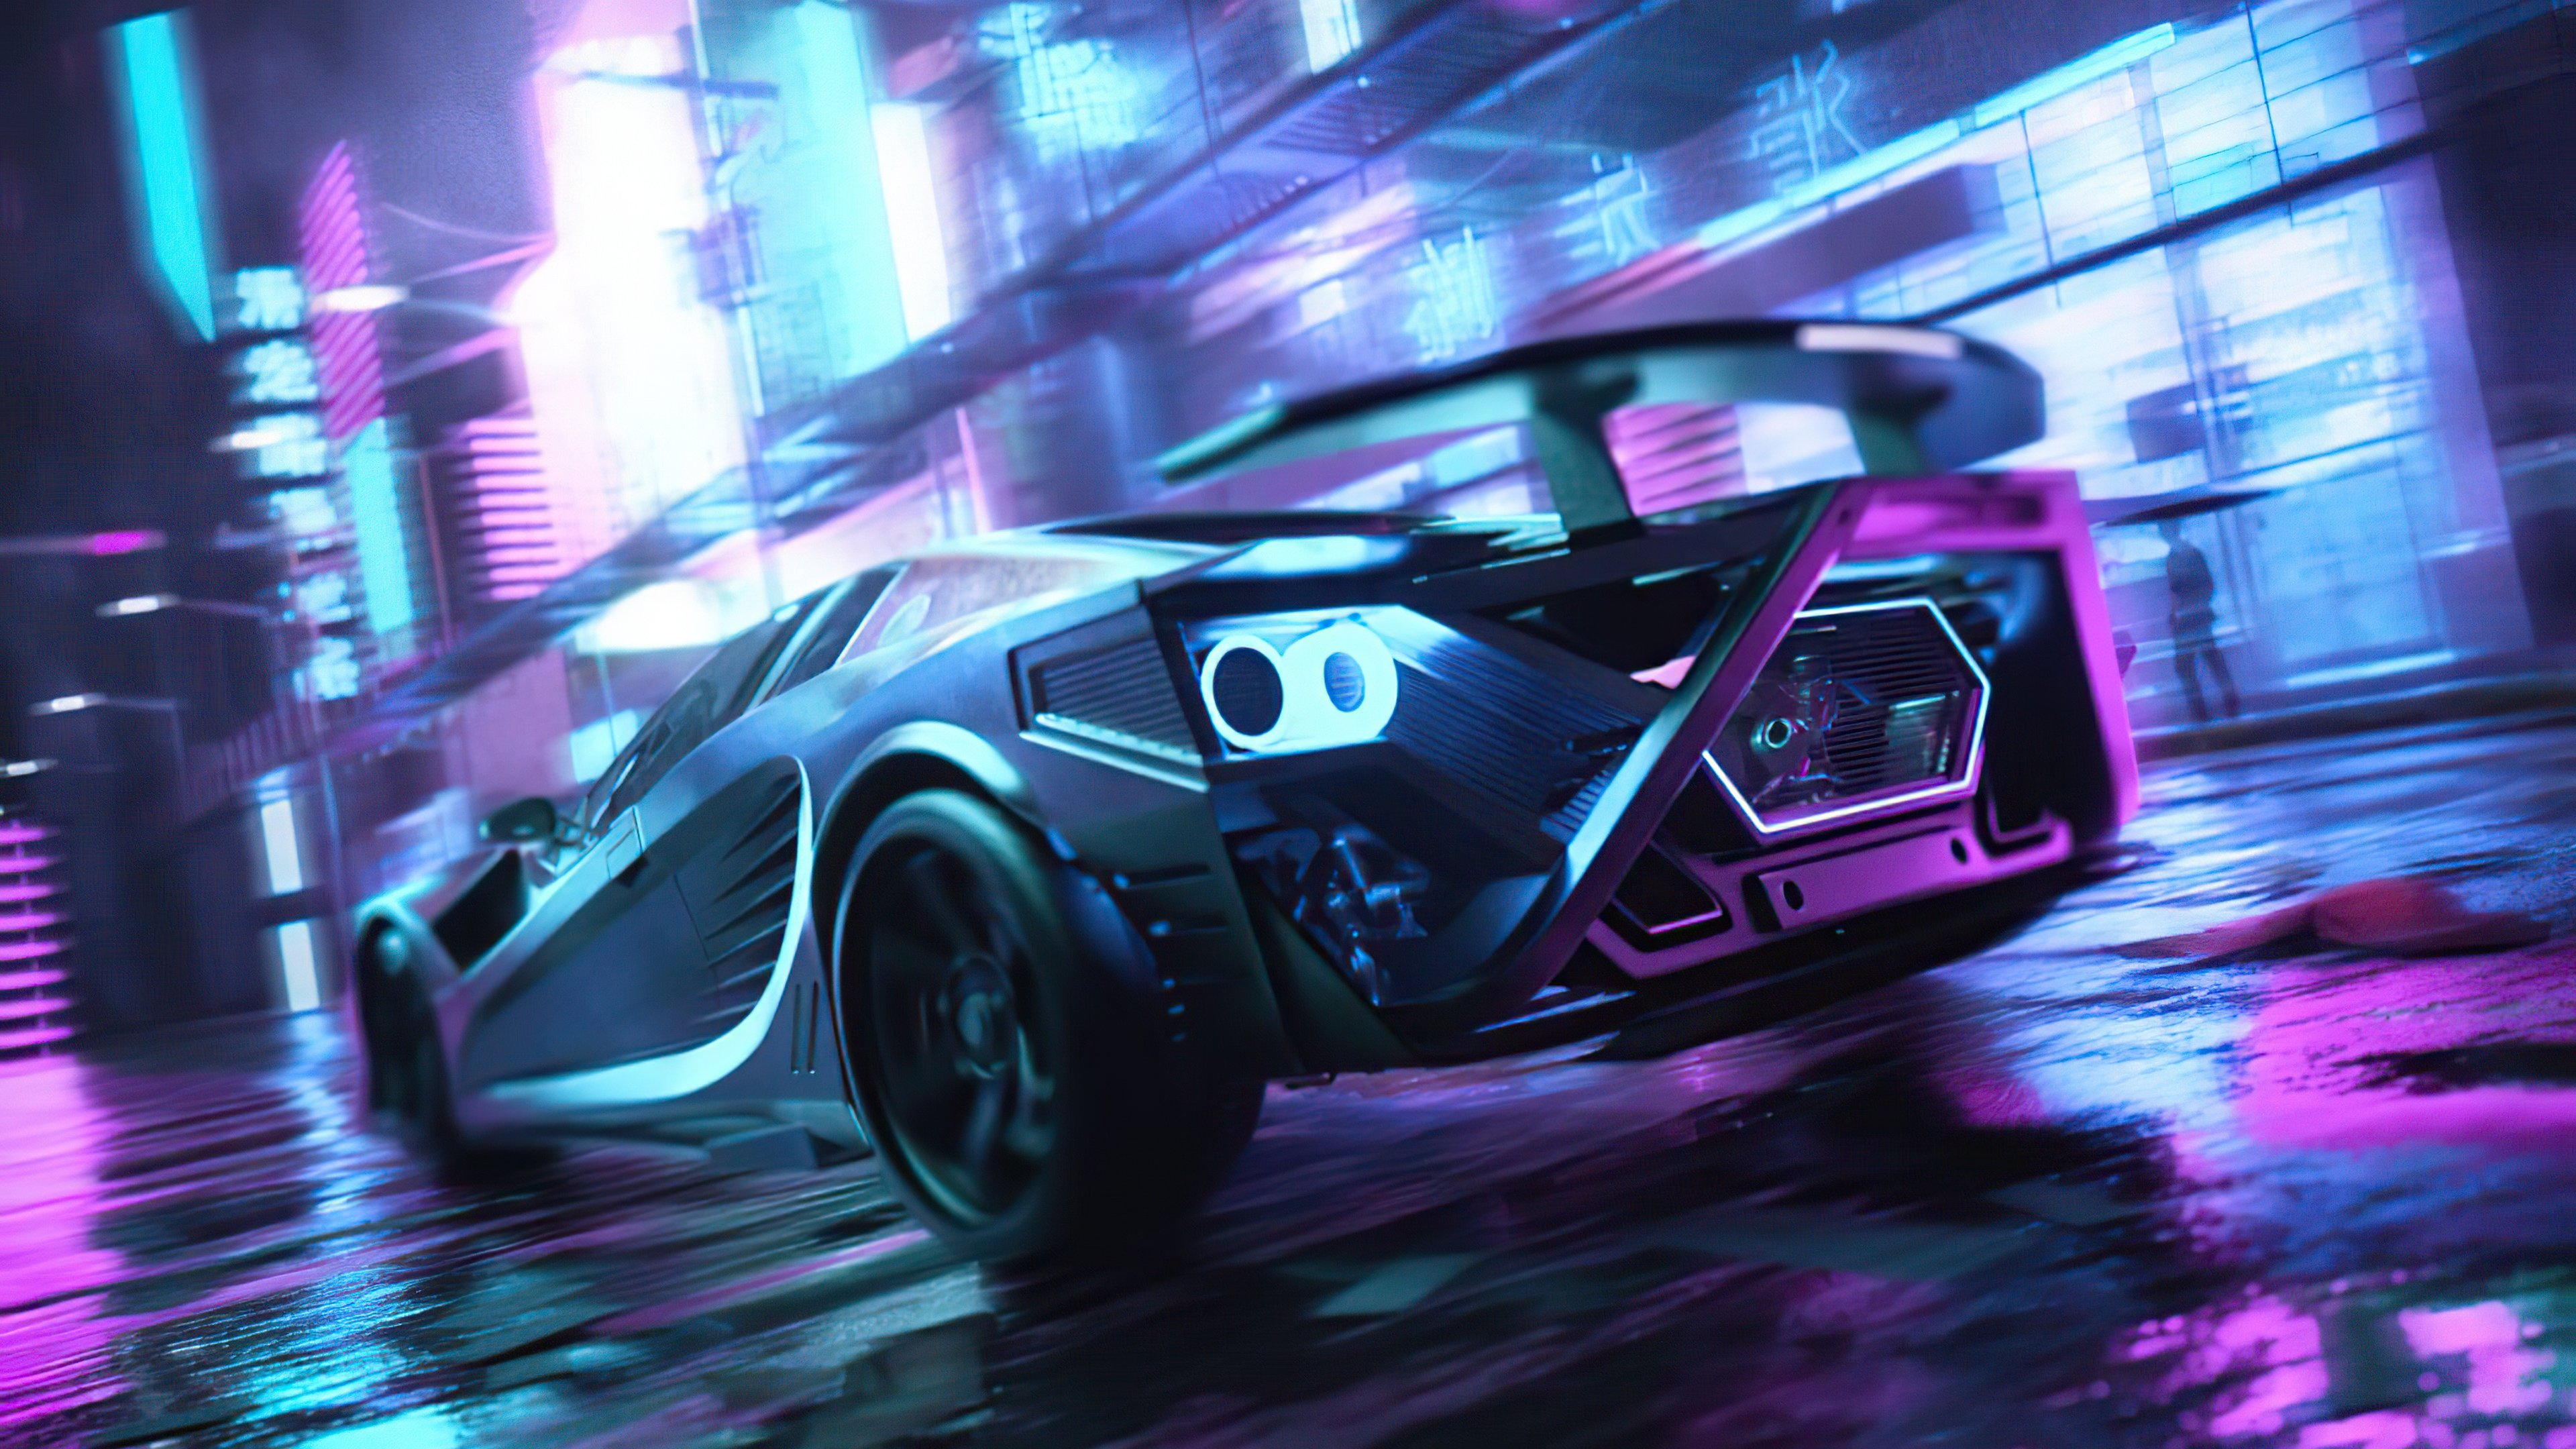 Scifi Neon Cars On Street 1366x768 Resolution HD 4k Wallpaper, Image, Background, Photo and Picture